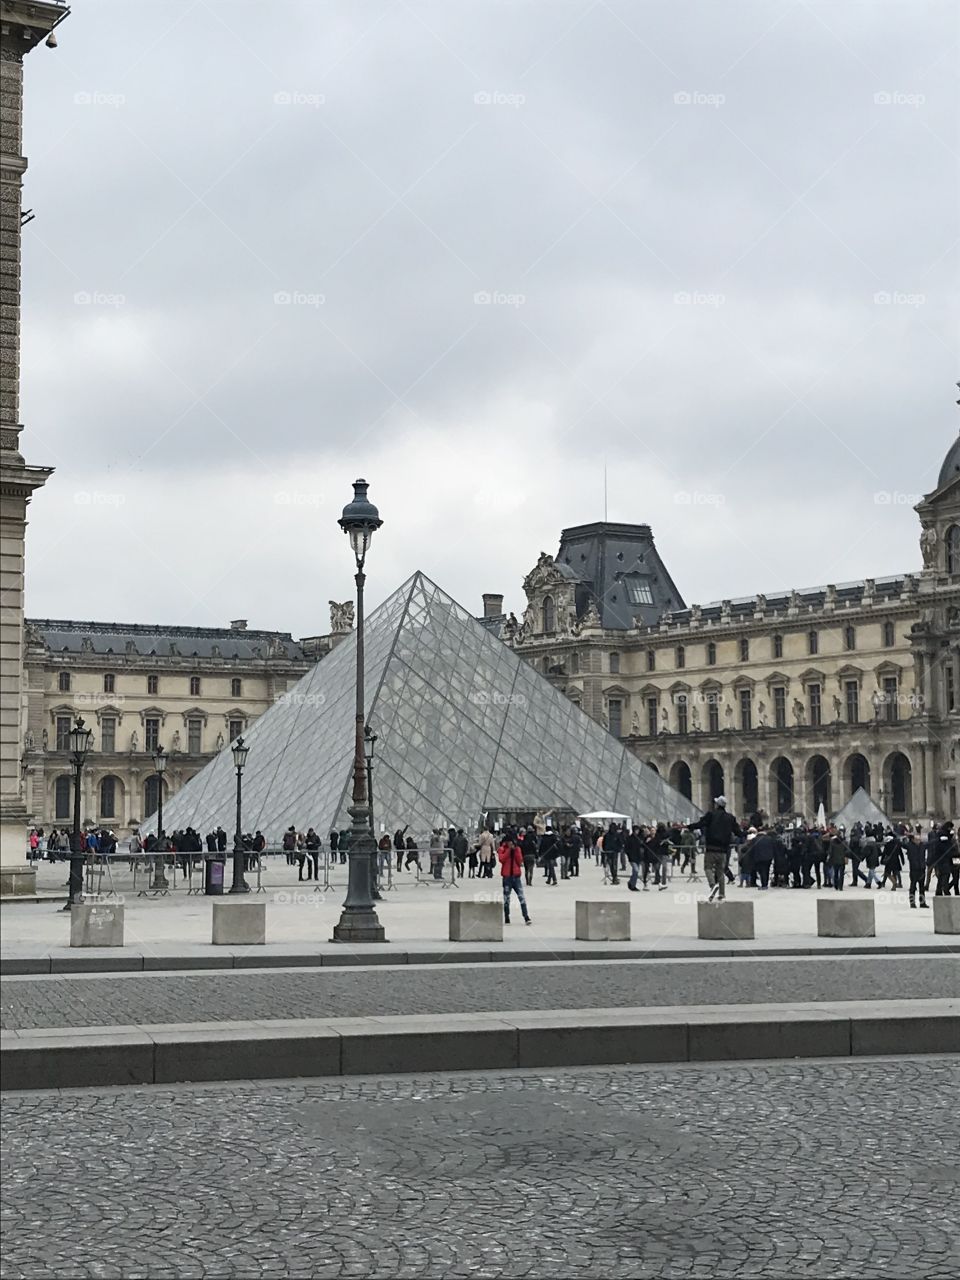 View of the pyramid at Louie museum in Paris France 